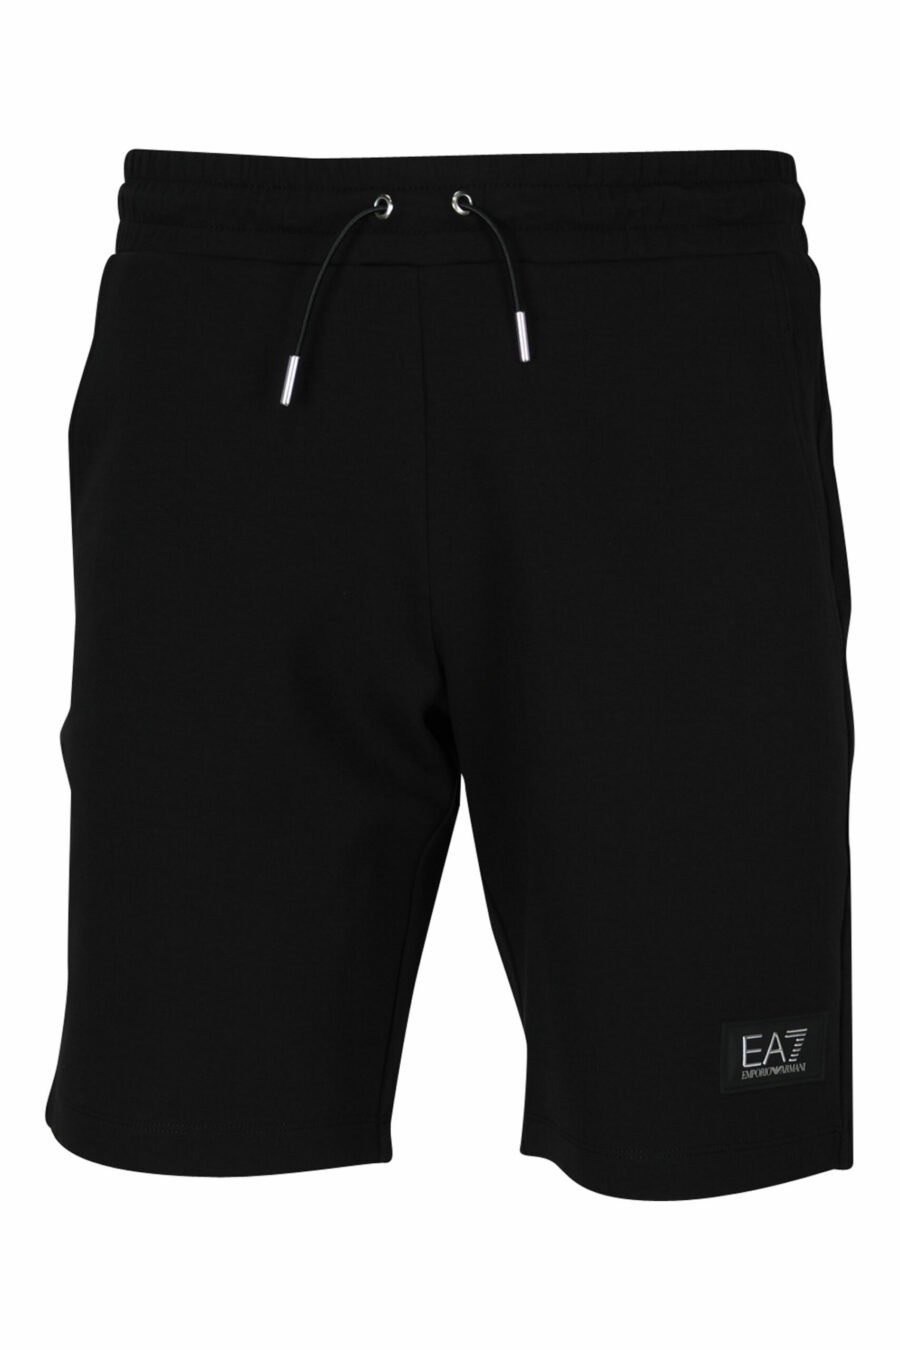 Tracksuit bottoms black shorts with white "lux identity" minilogue on black plate - 107531 scaled